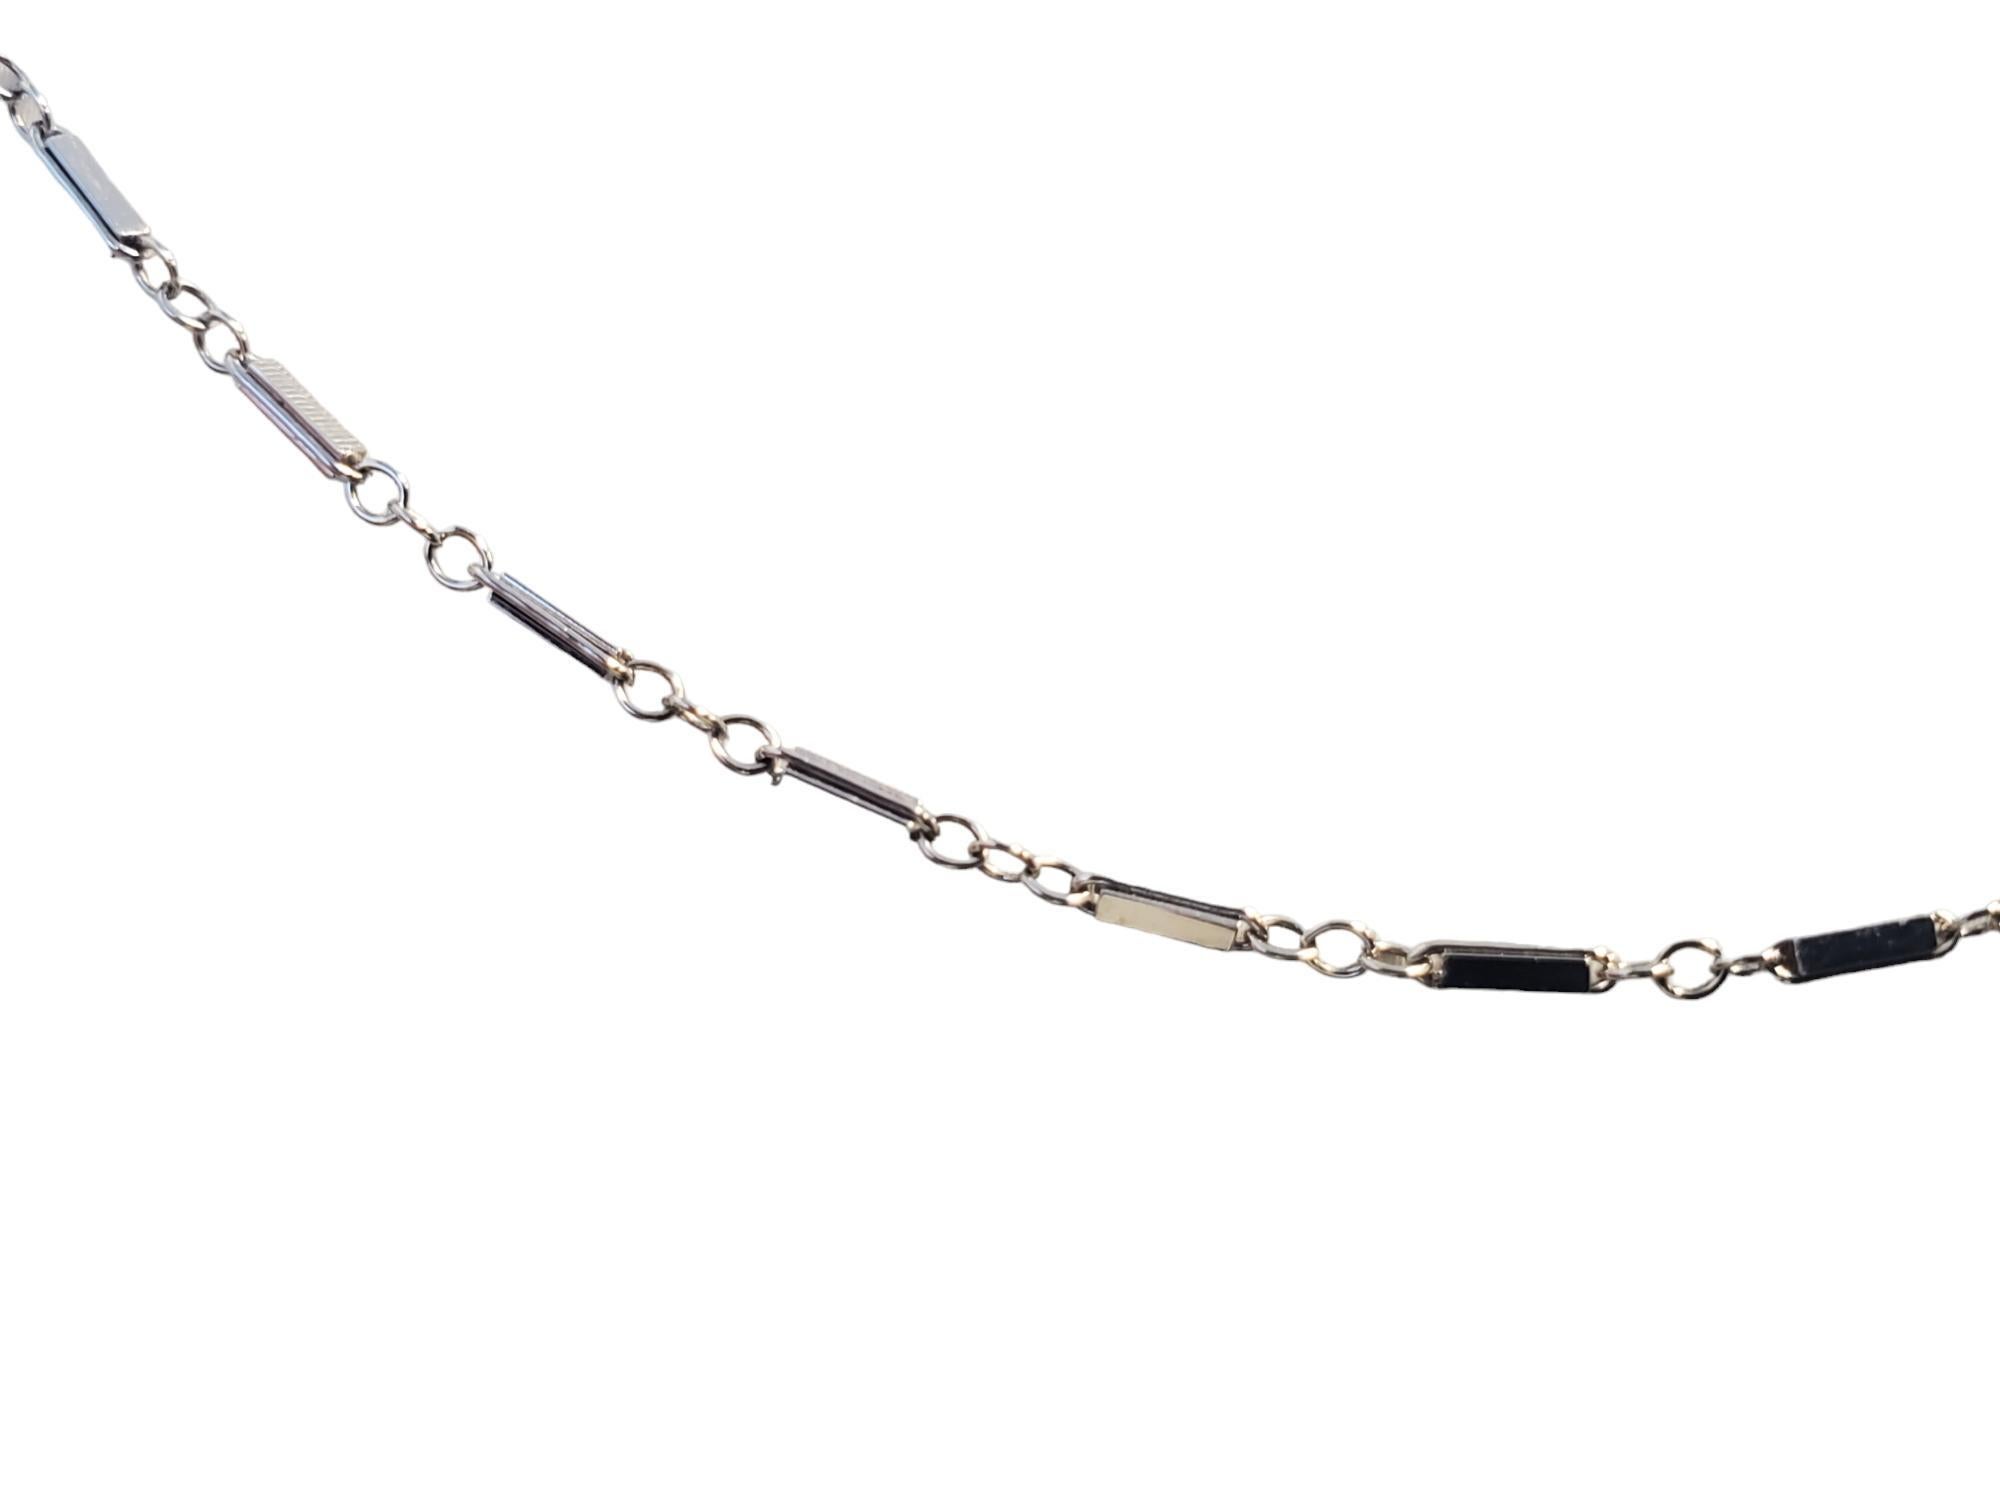 Vintage 14k Chain White Gold Stamped Link and Bar Pattern Minimalistic Necklace For Sale 2